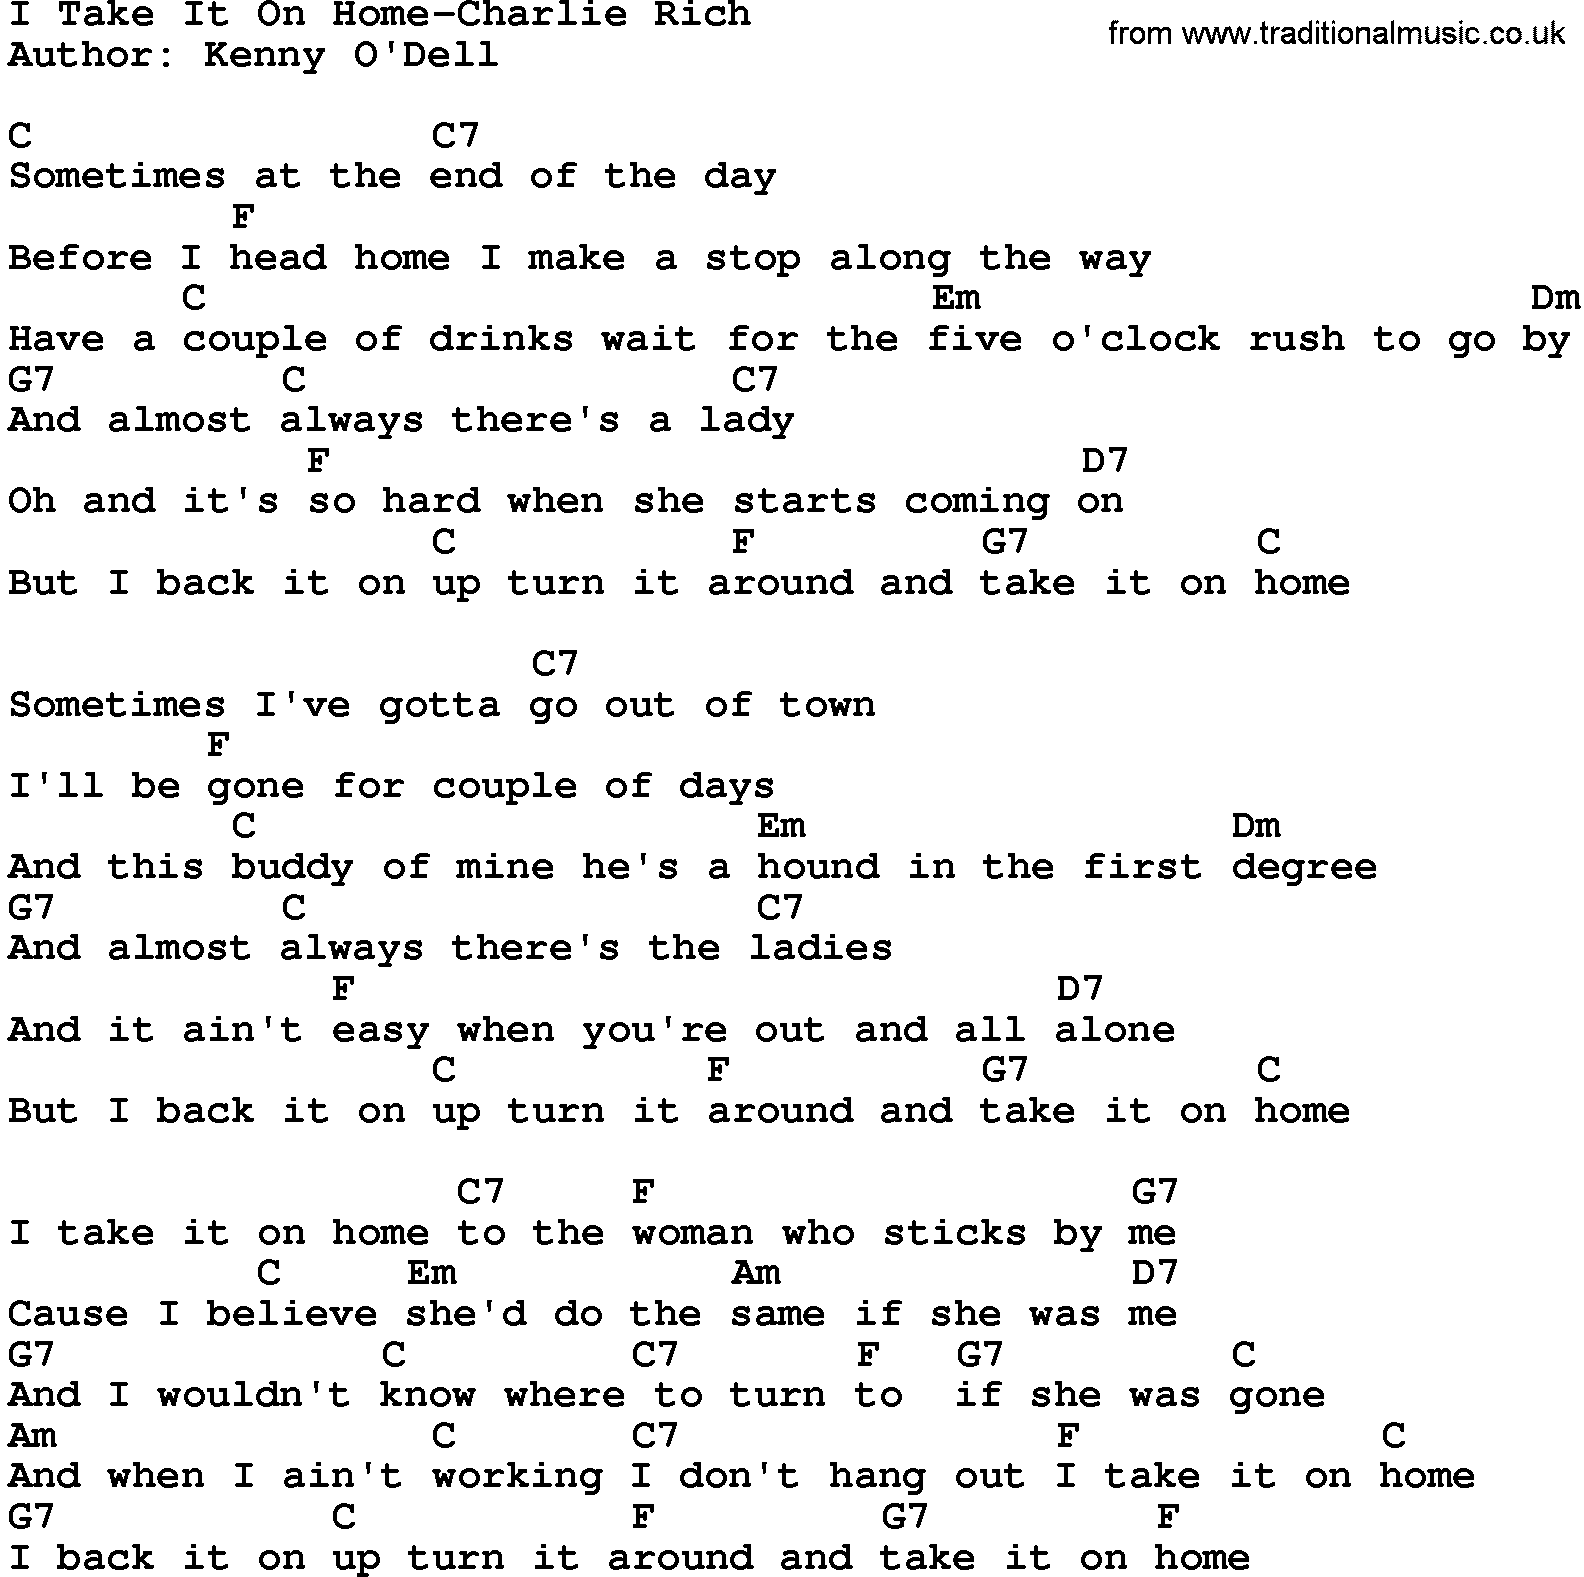 Country music song: I Take It On Home-Charlie Rich lyrics and chords